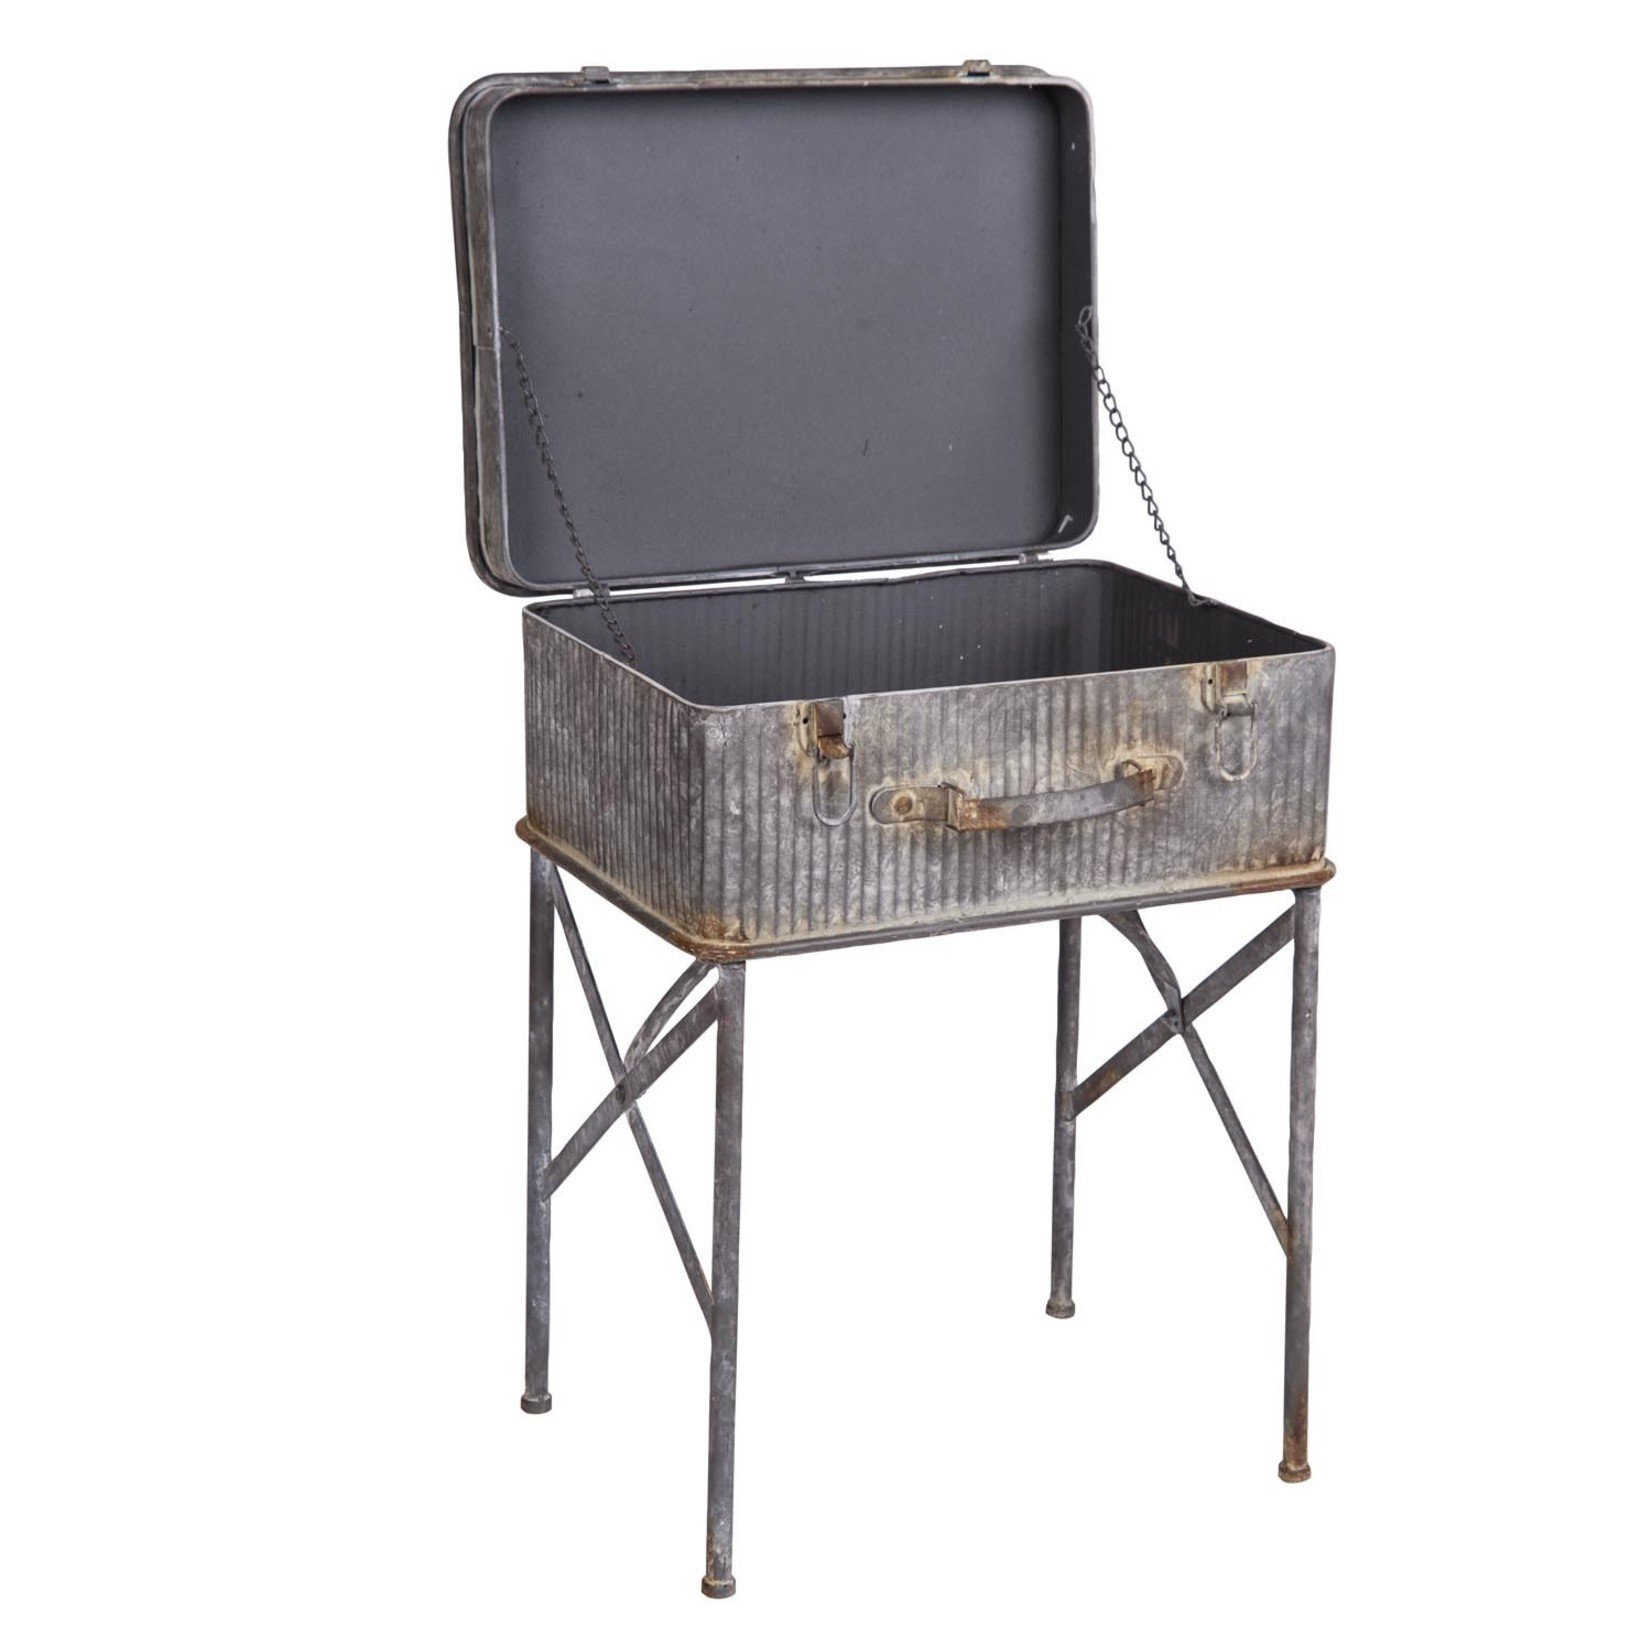 Foreside Home and Garden MM - Devon Suitcase Aluminum Side Table